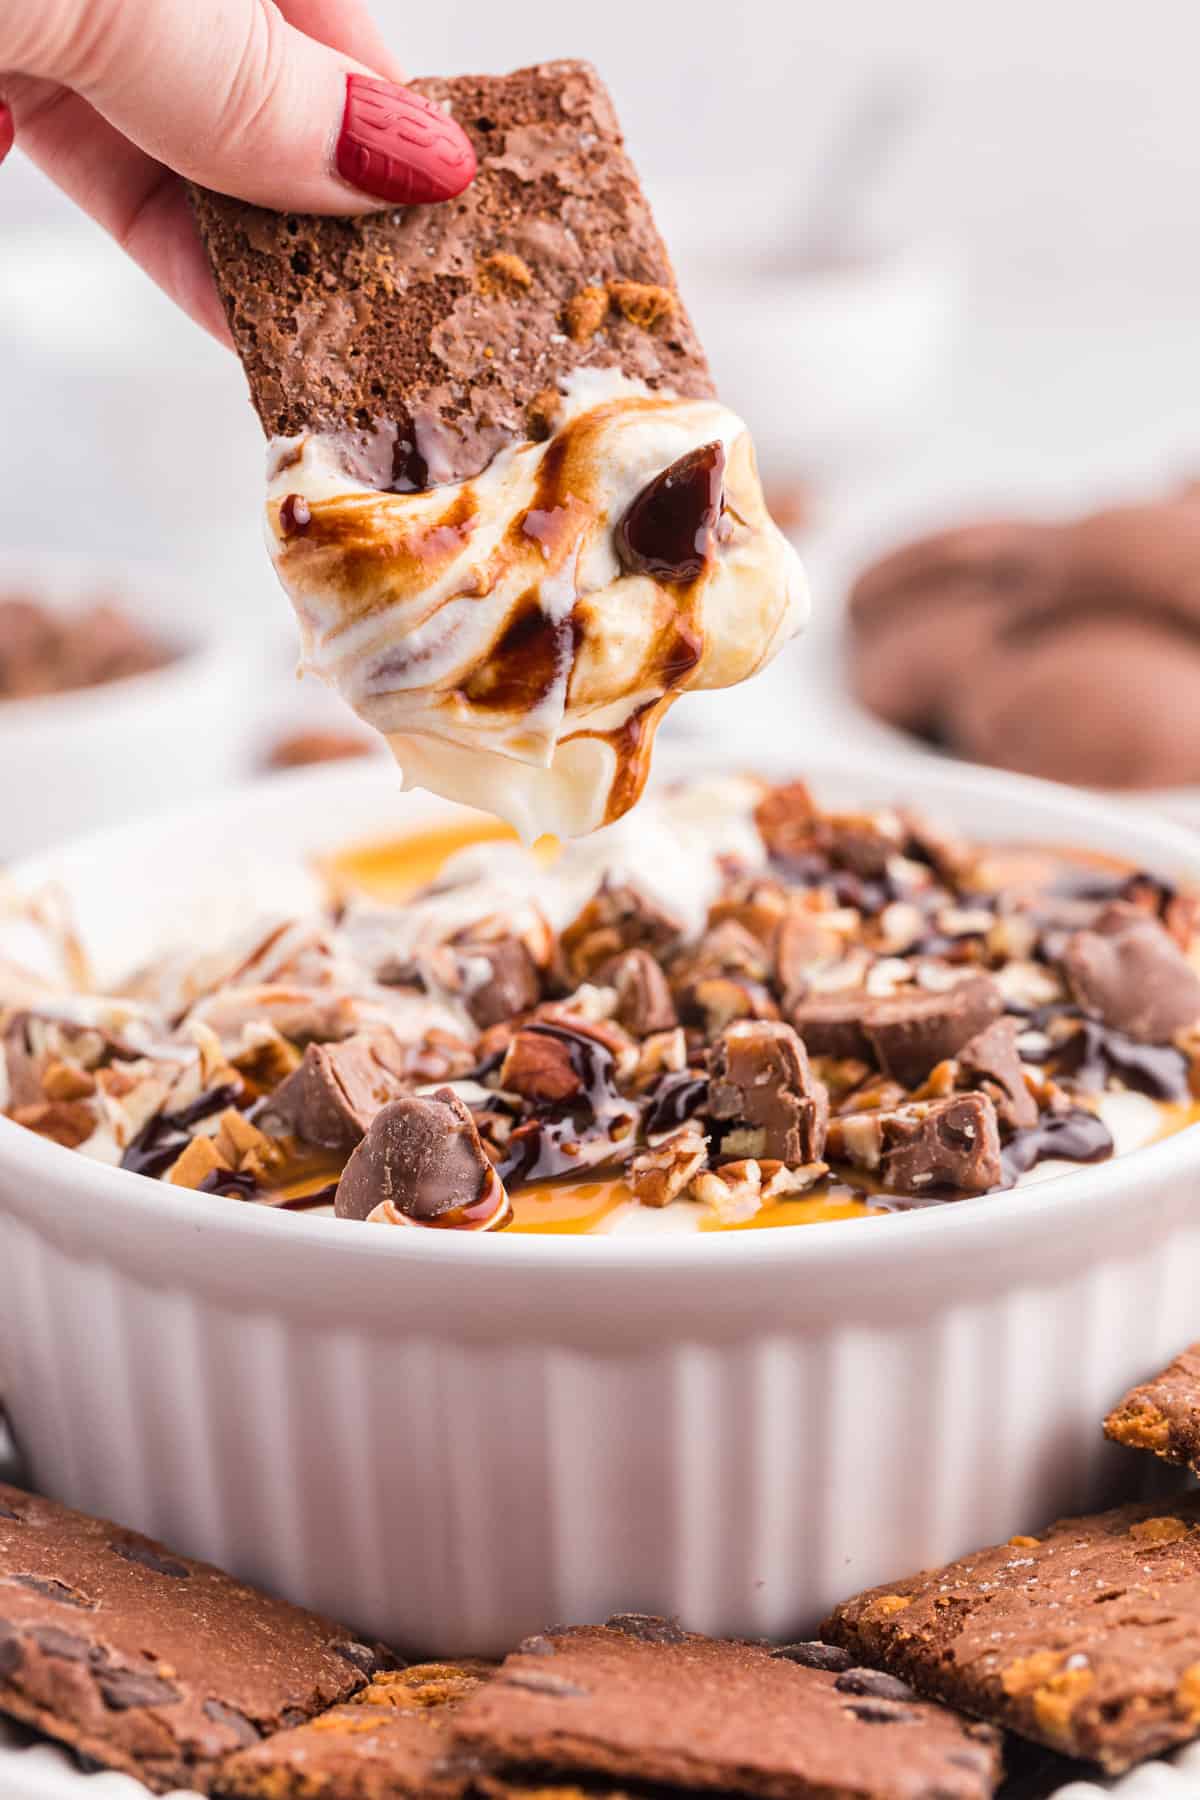 Hand reaching in to dip a chocolate cookie into the creamy no bake turtle cheesecake dip.